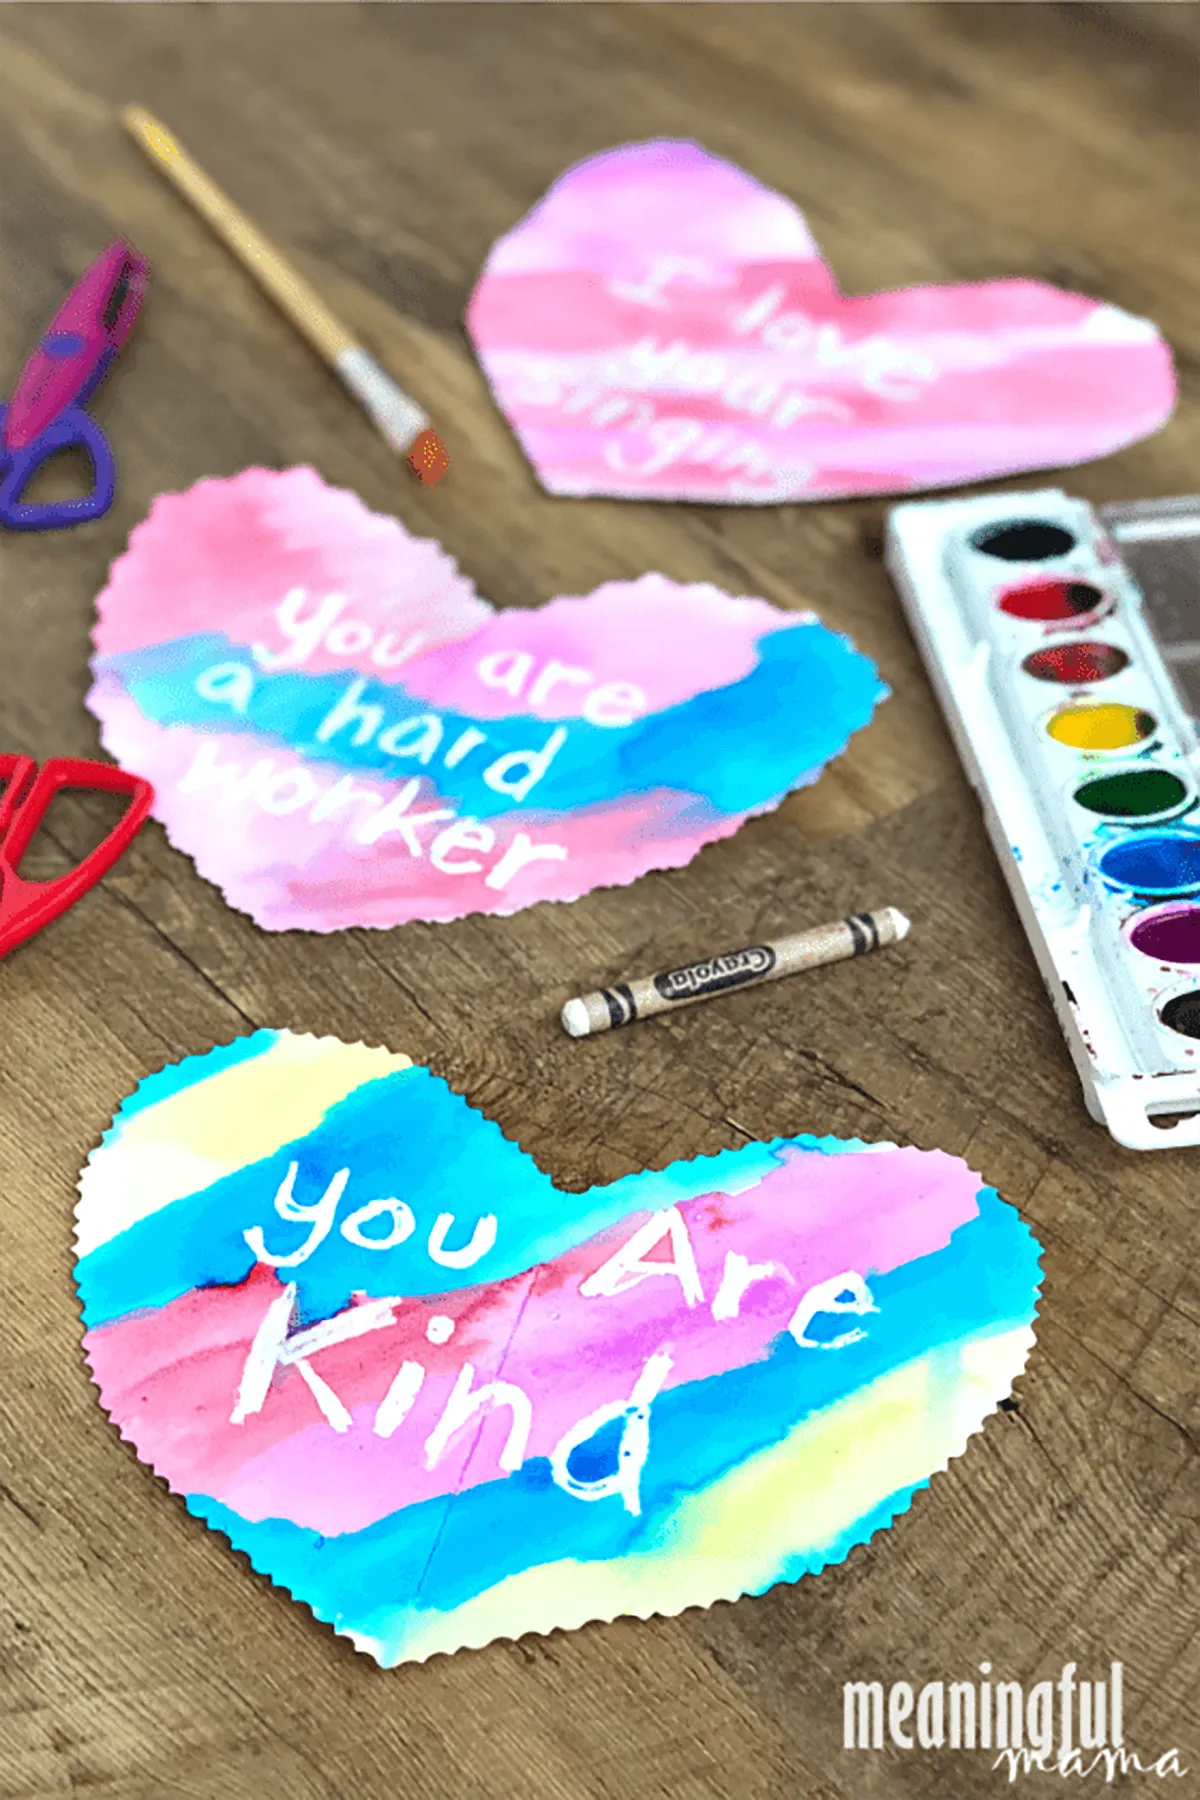 A paper heart with the a message written on it which says 'you are kind' - valentines crafts for kids